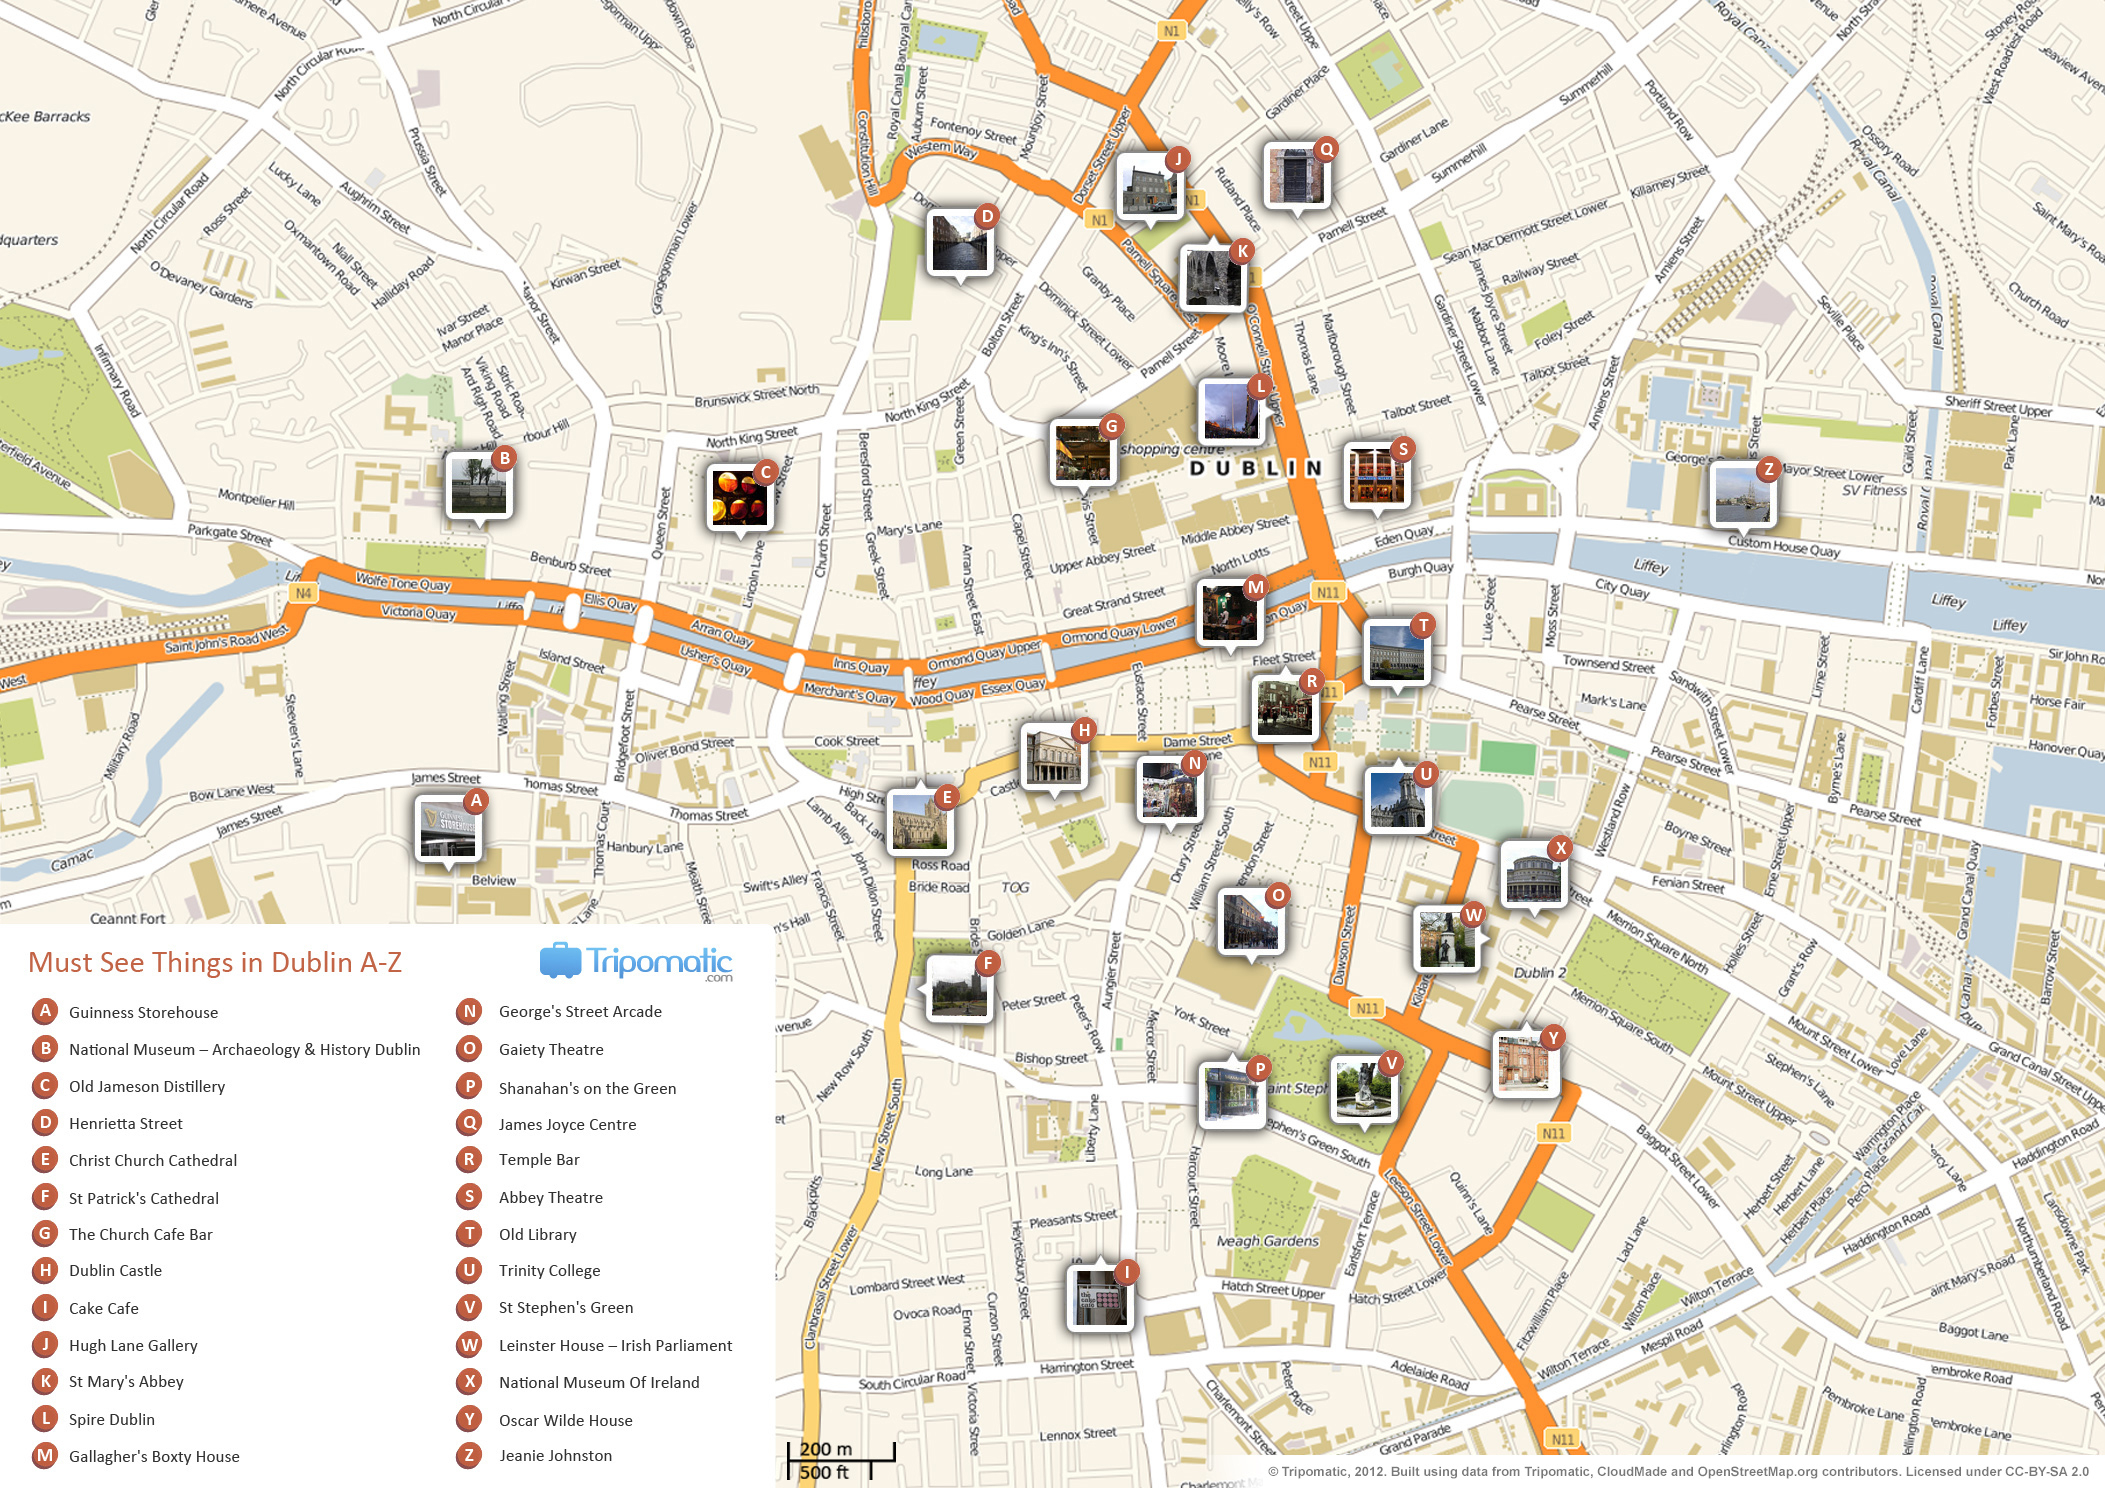 File:dublin Printable Tourist Attractions Map - Wikimedia Commons - Dublin Tourist Map Printable